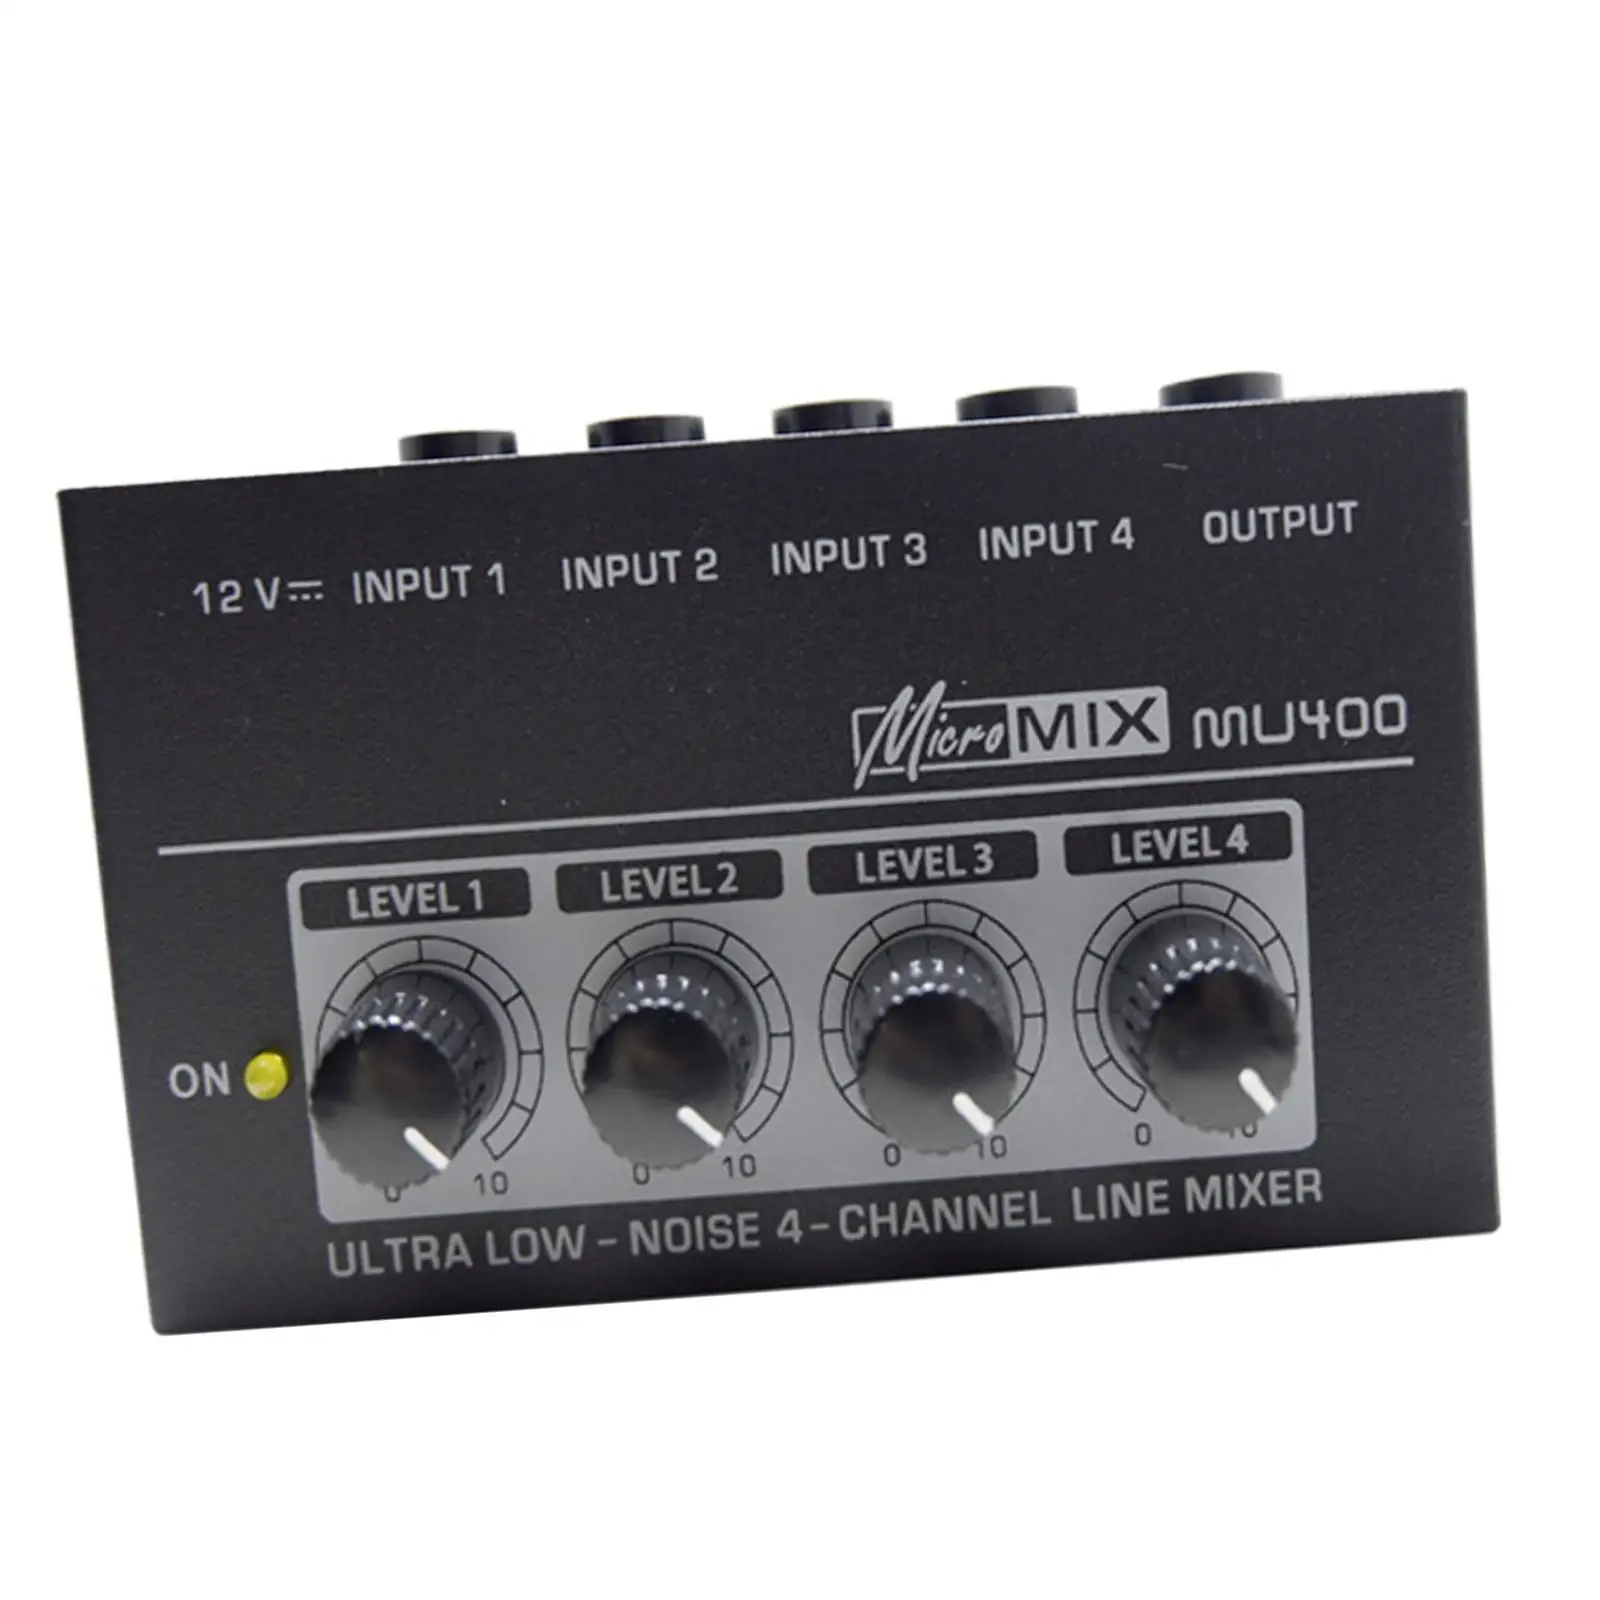 Portable Mixer High Sound Quality Mini Audio Mixer Line Mixer for Computer Recording Small Clubs or Bars CD Player Mobile Phone